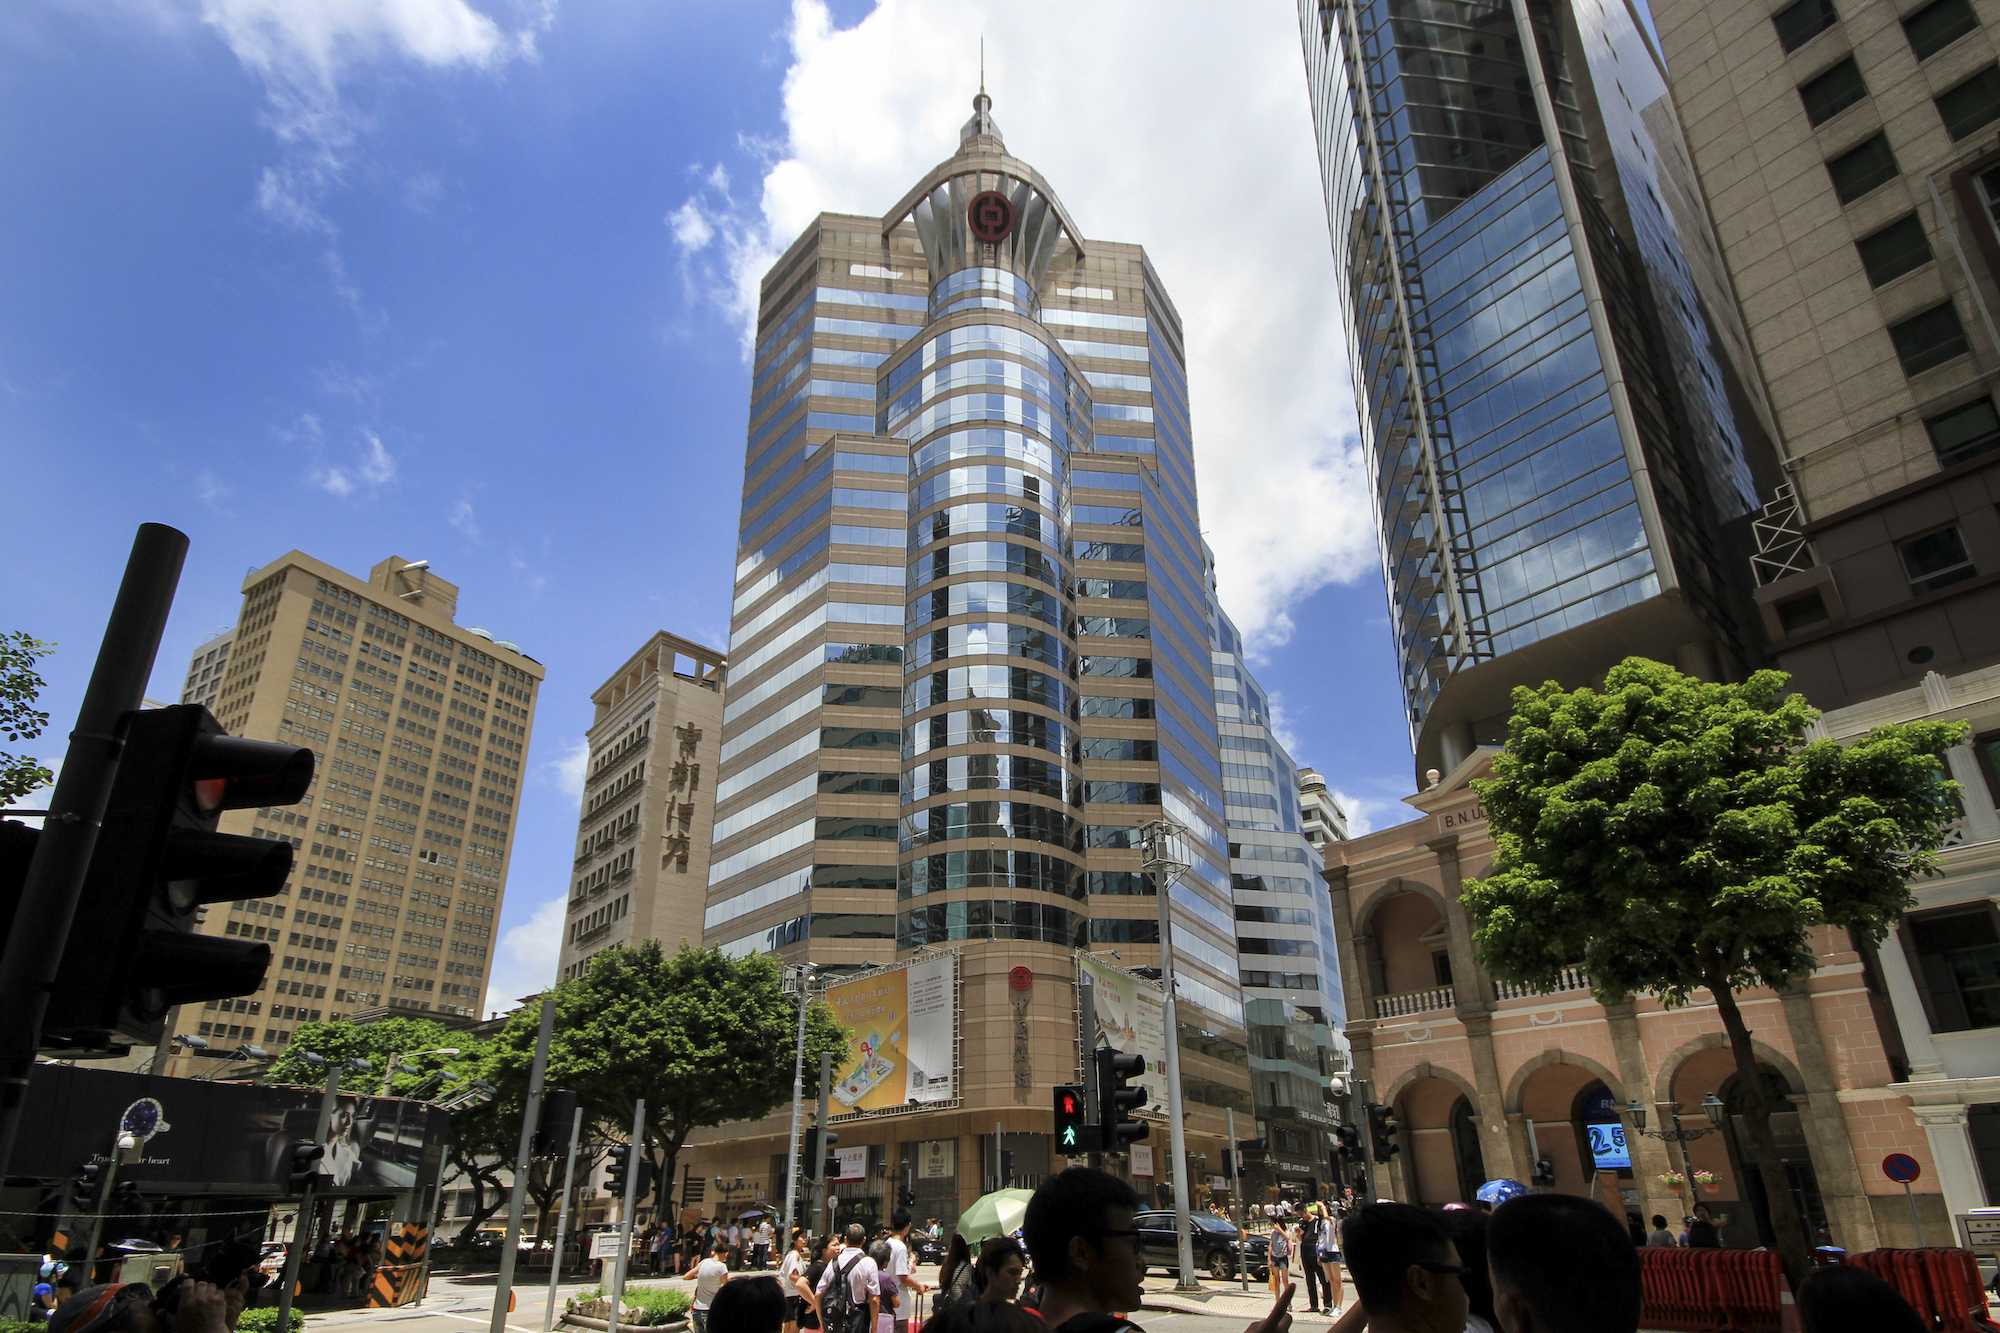 Macao’s financial system is being overhauled